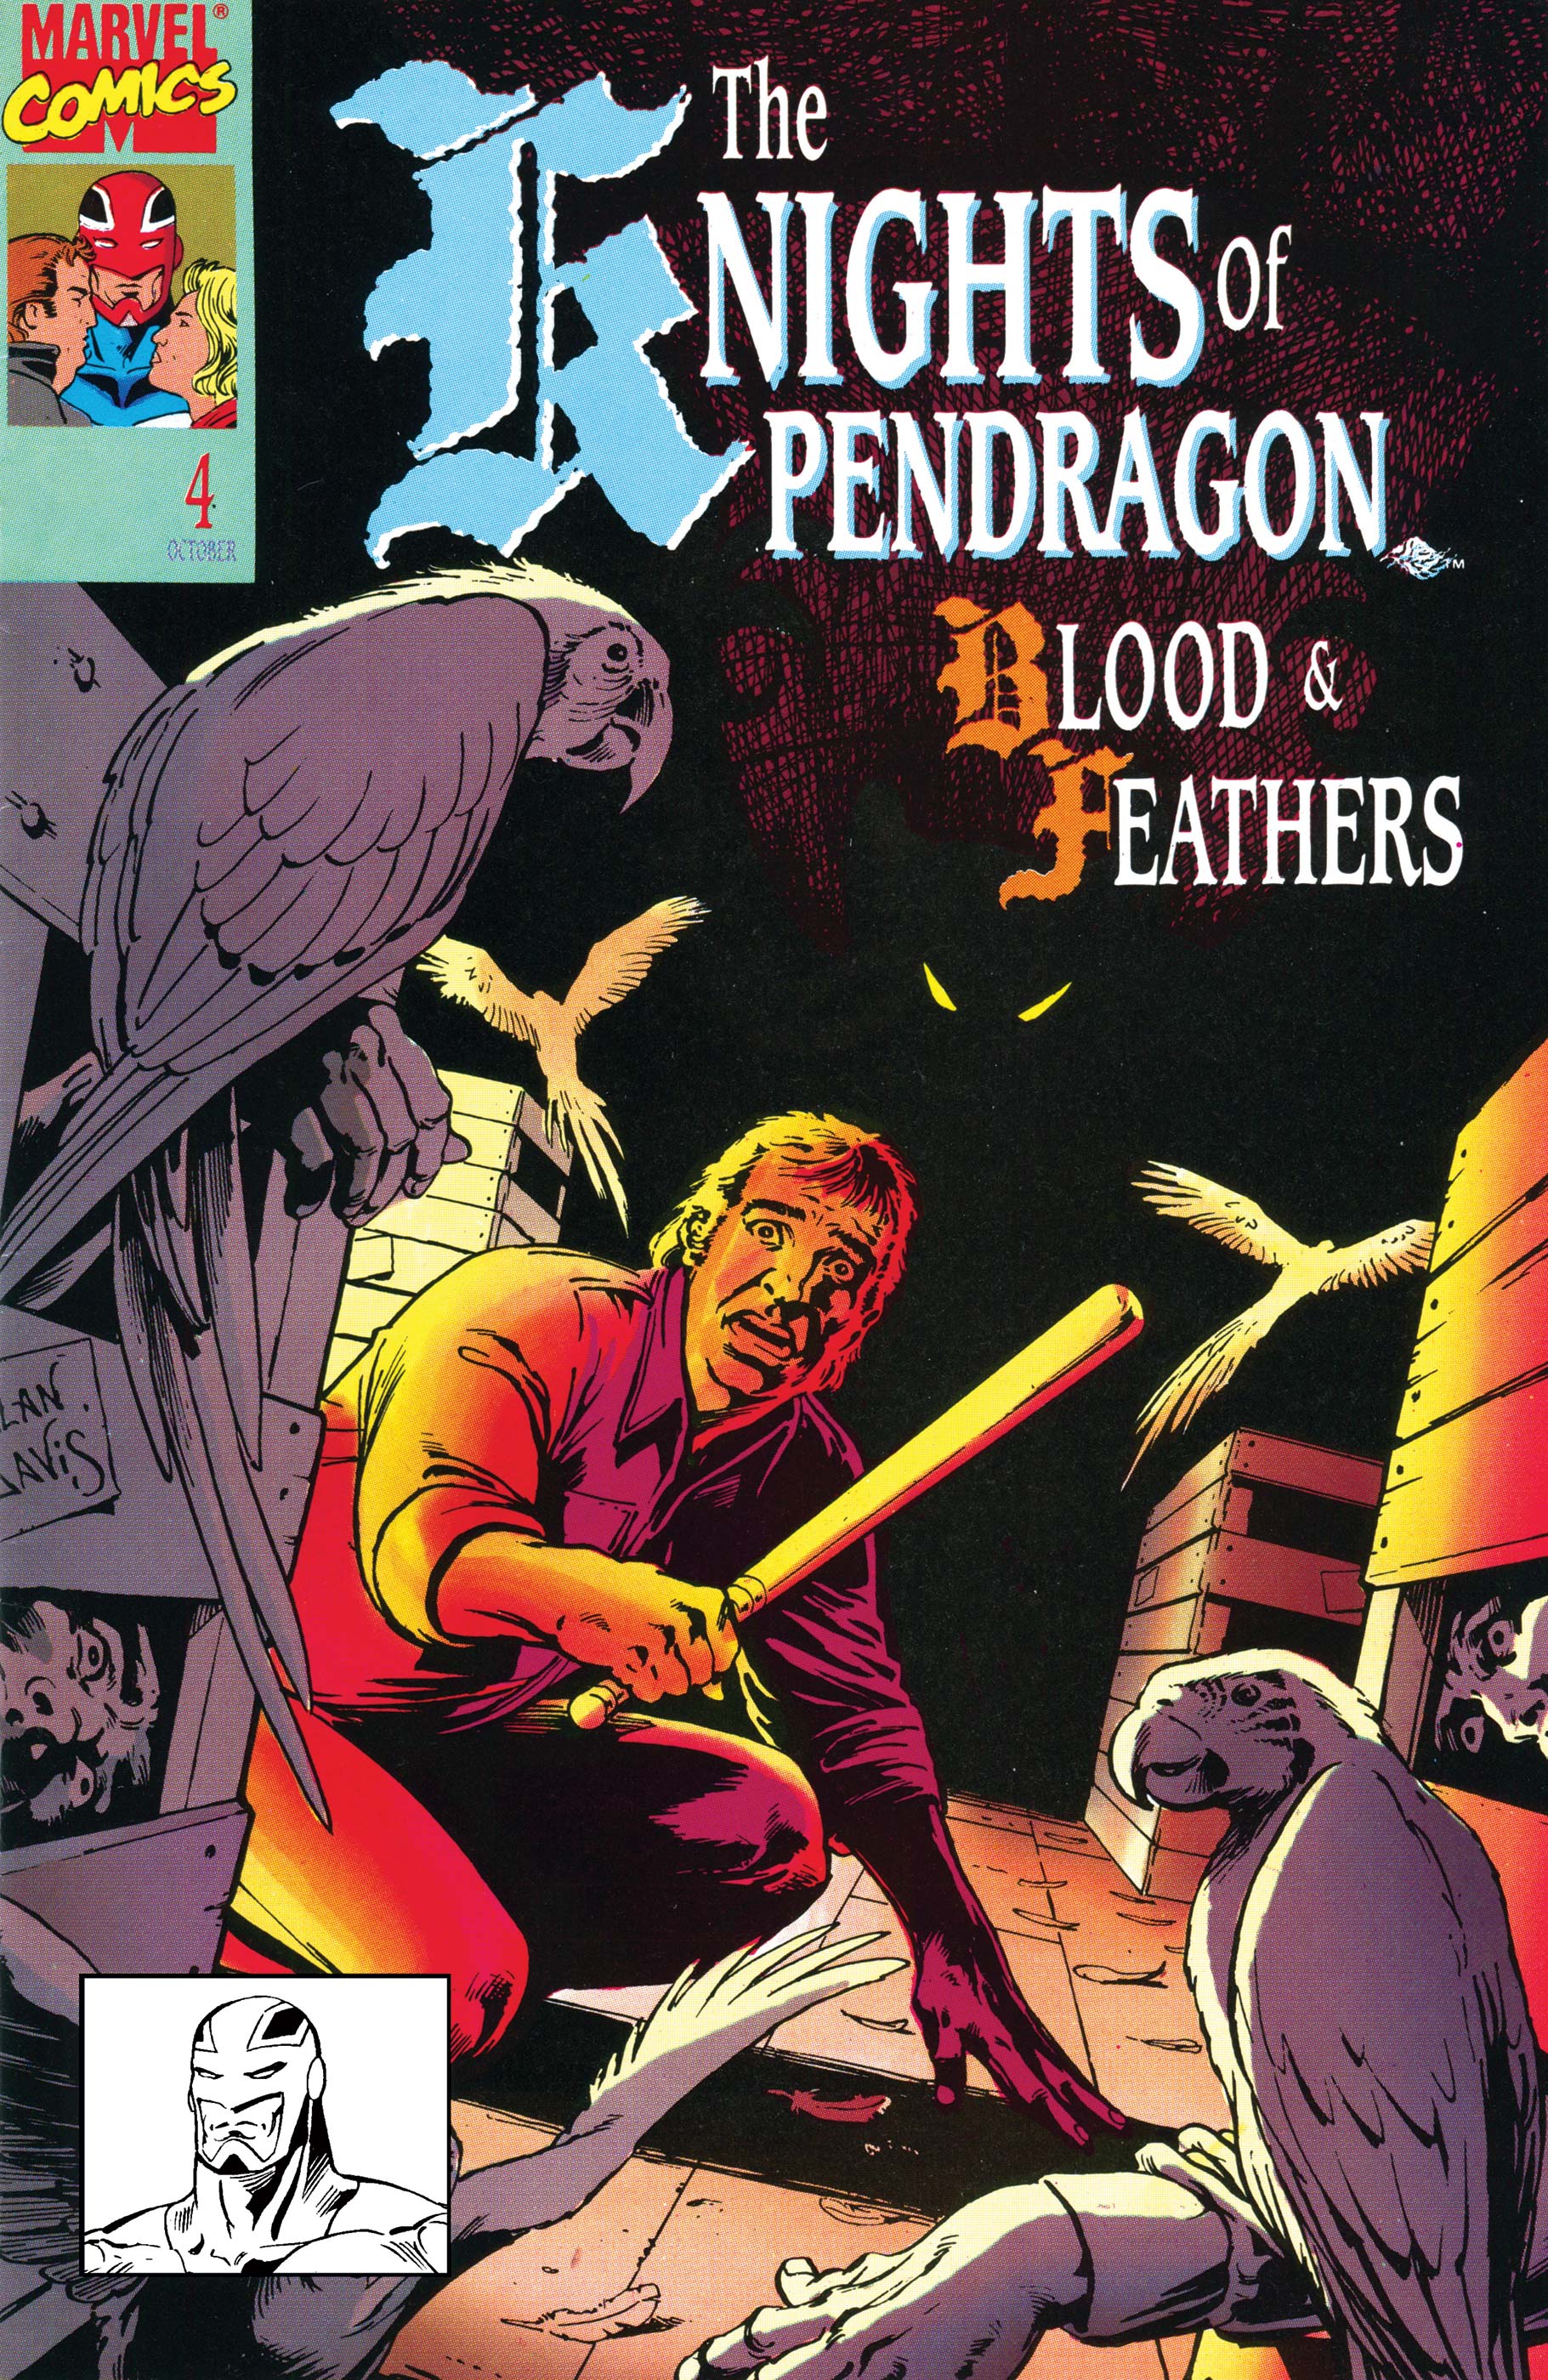 Knights of Pendragon (1990) #4